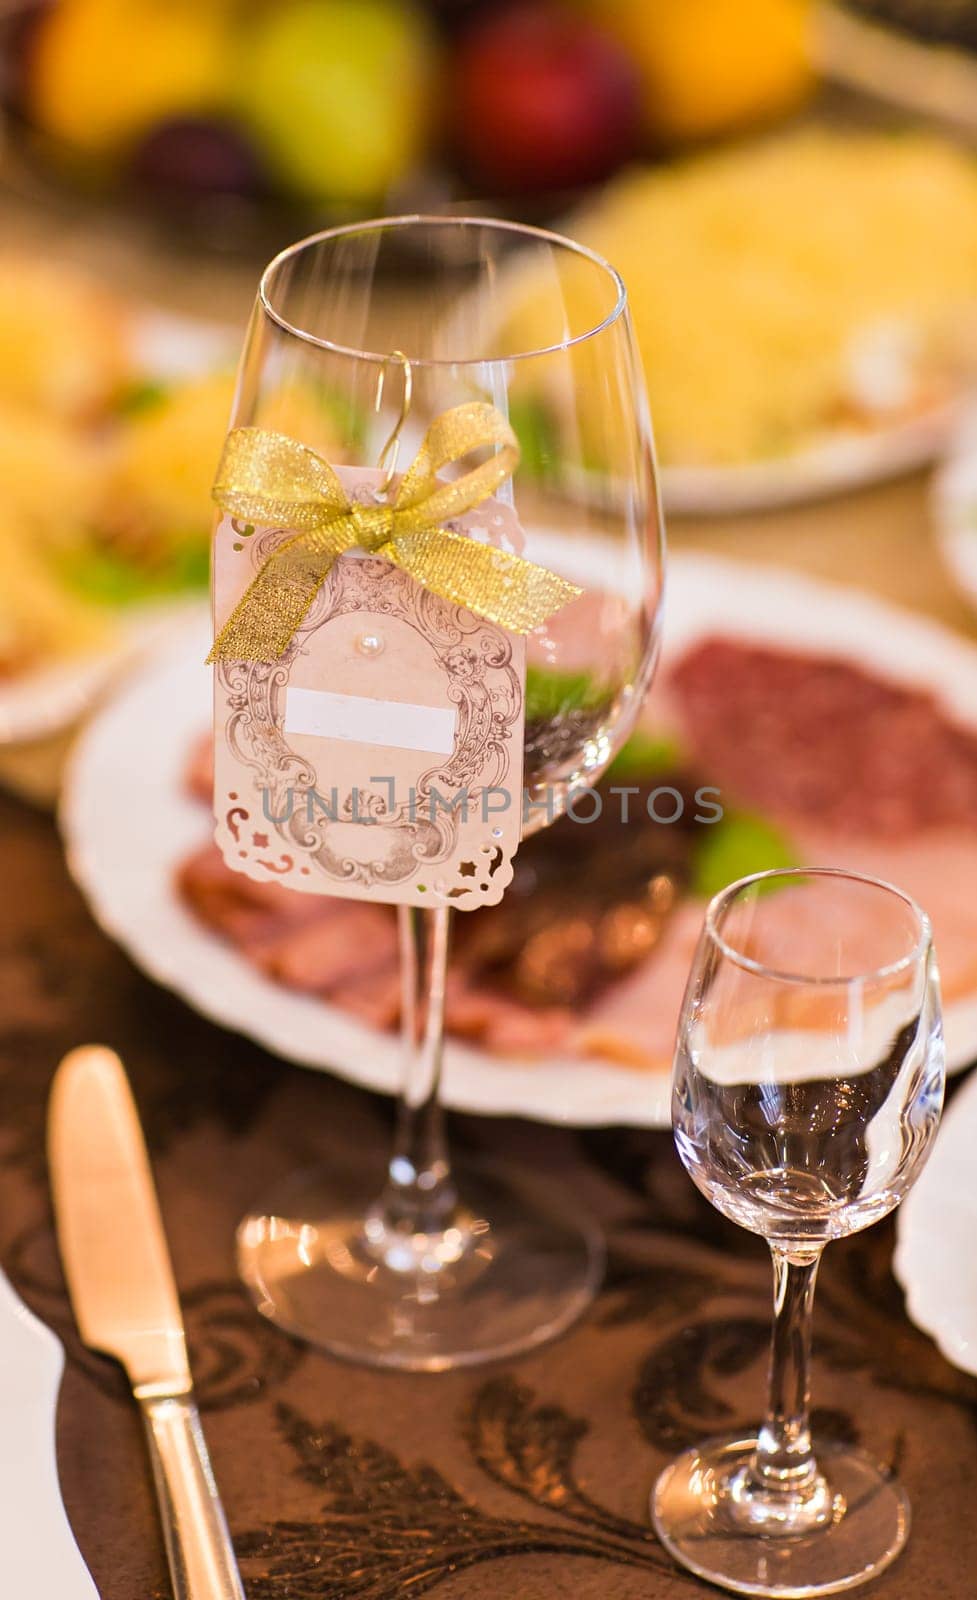 Wedding table. Close-up of wine glass and name card